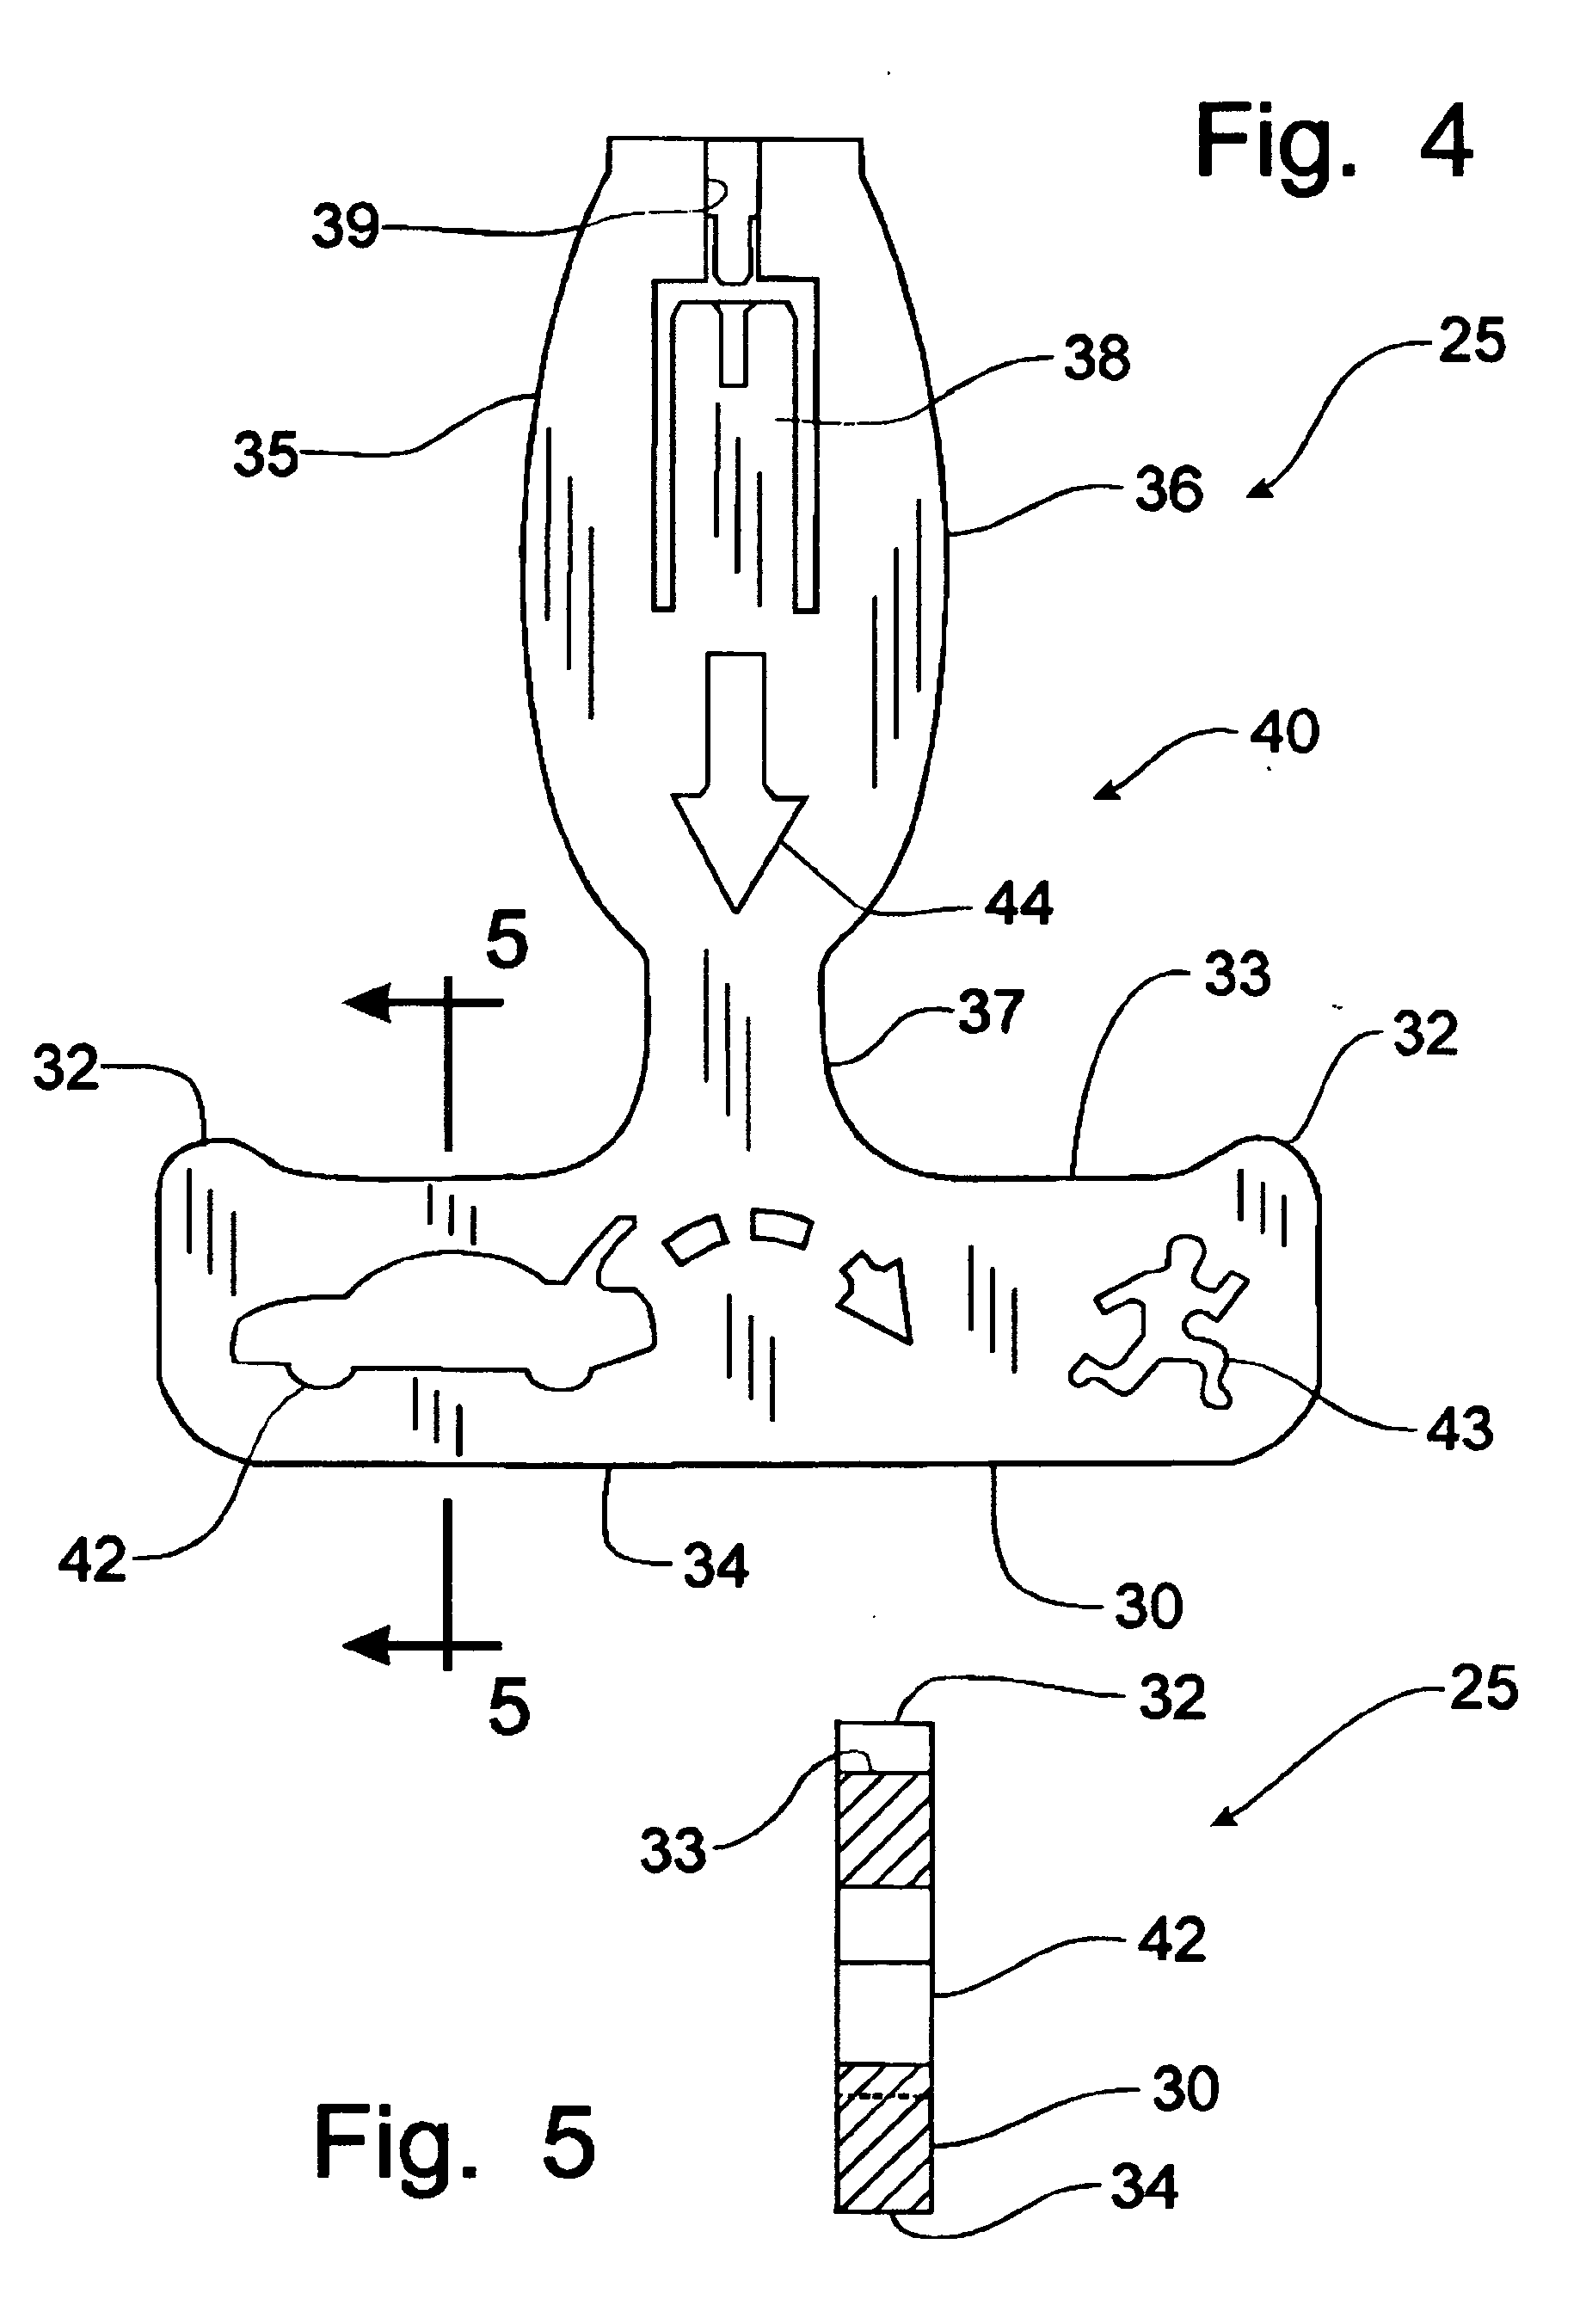 Method of manufacturing a truck release handle for automobiles